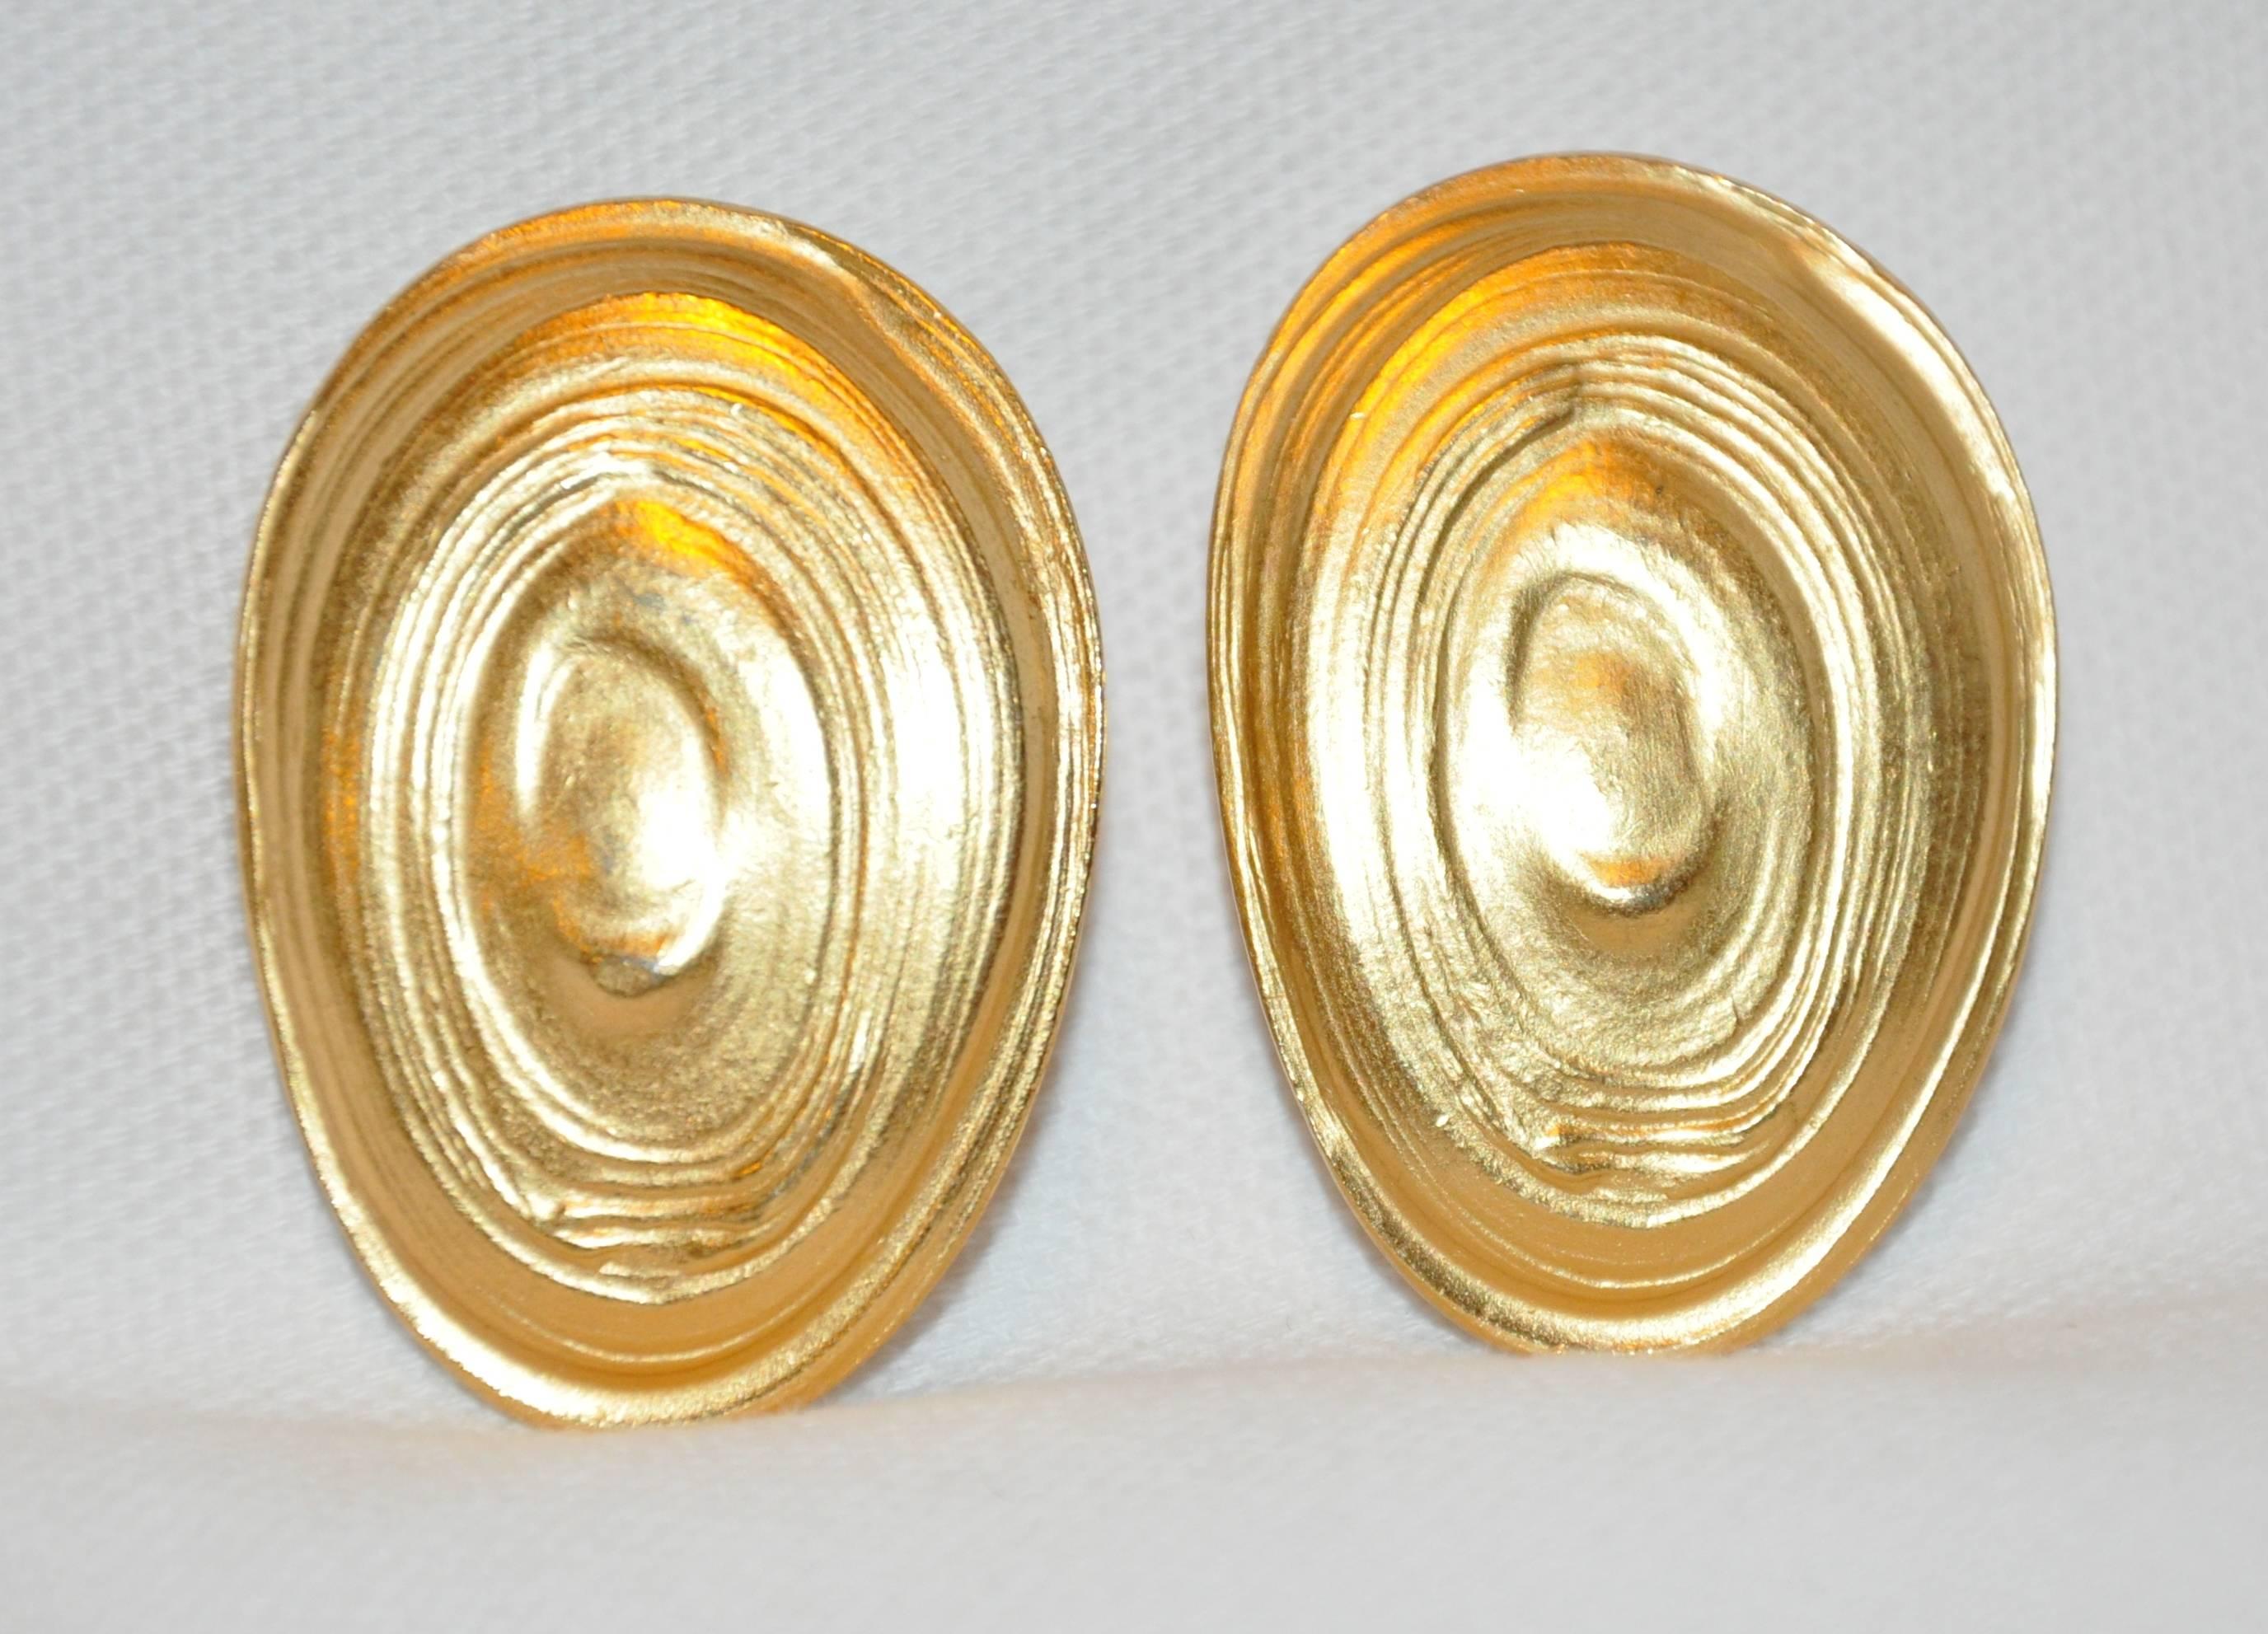          Wonderfully simply yet elegant, these "Limited Edition" "Swirls" gilded gold vermeil hardware by Konio Yelamamo for Trifari measures 1 1/2" x 1". The back is etched with both Konio as well as Yelamamo, Made in